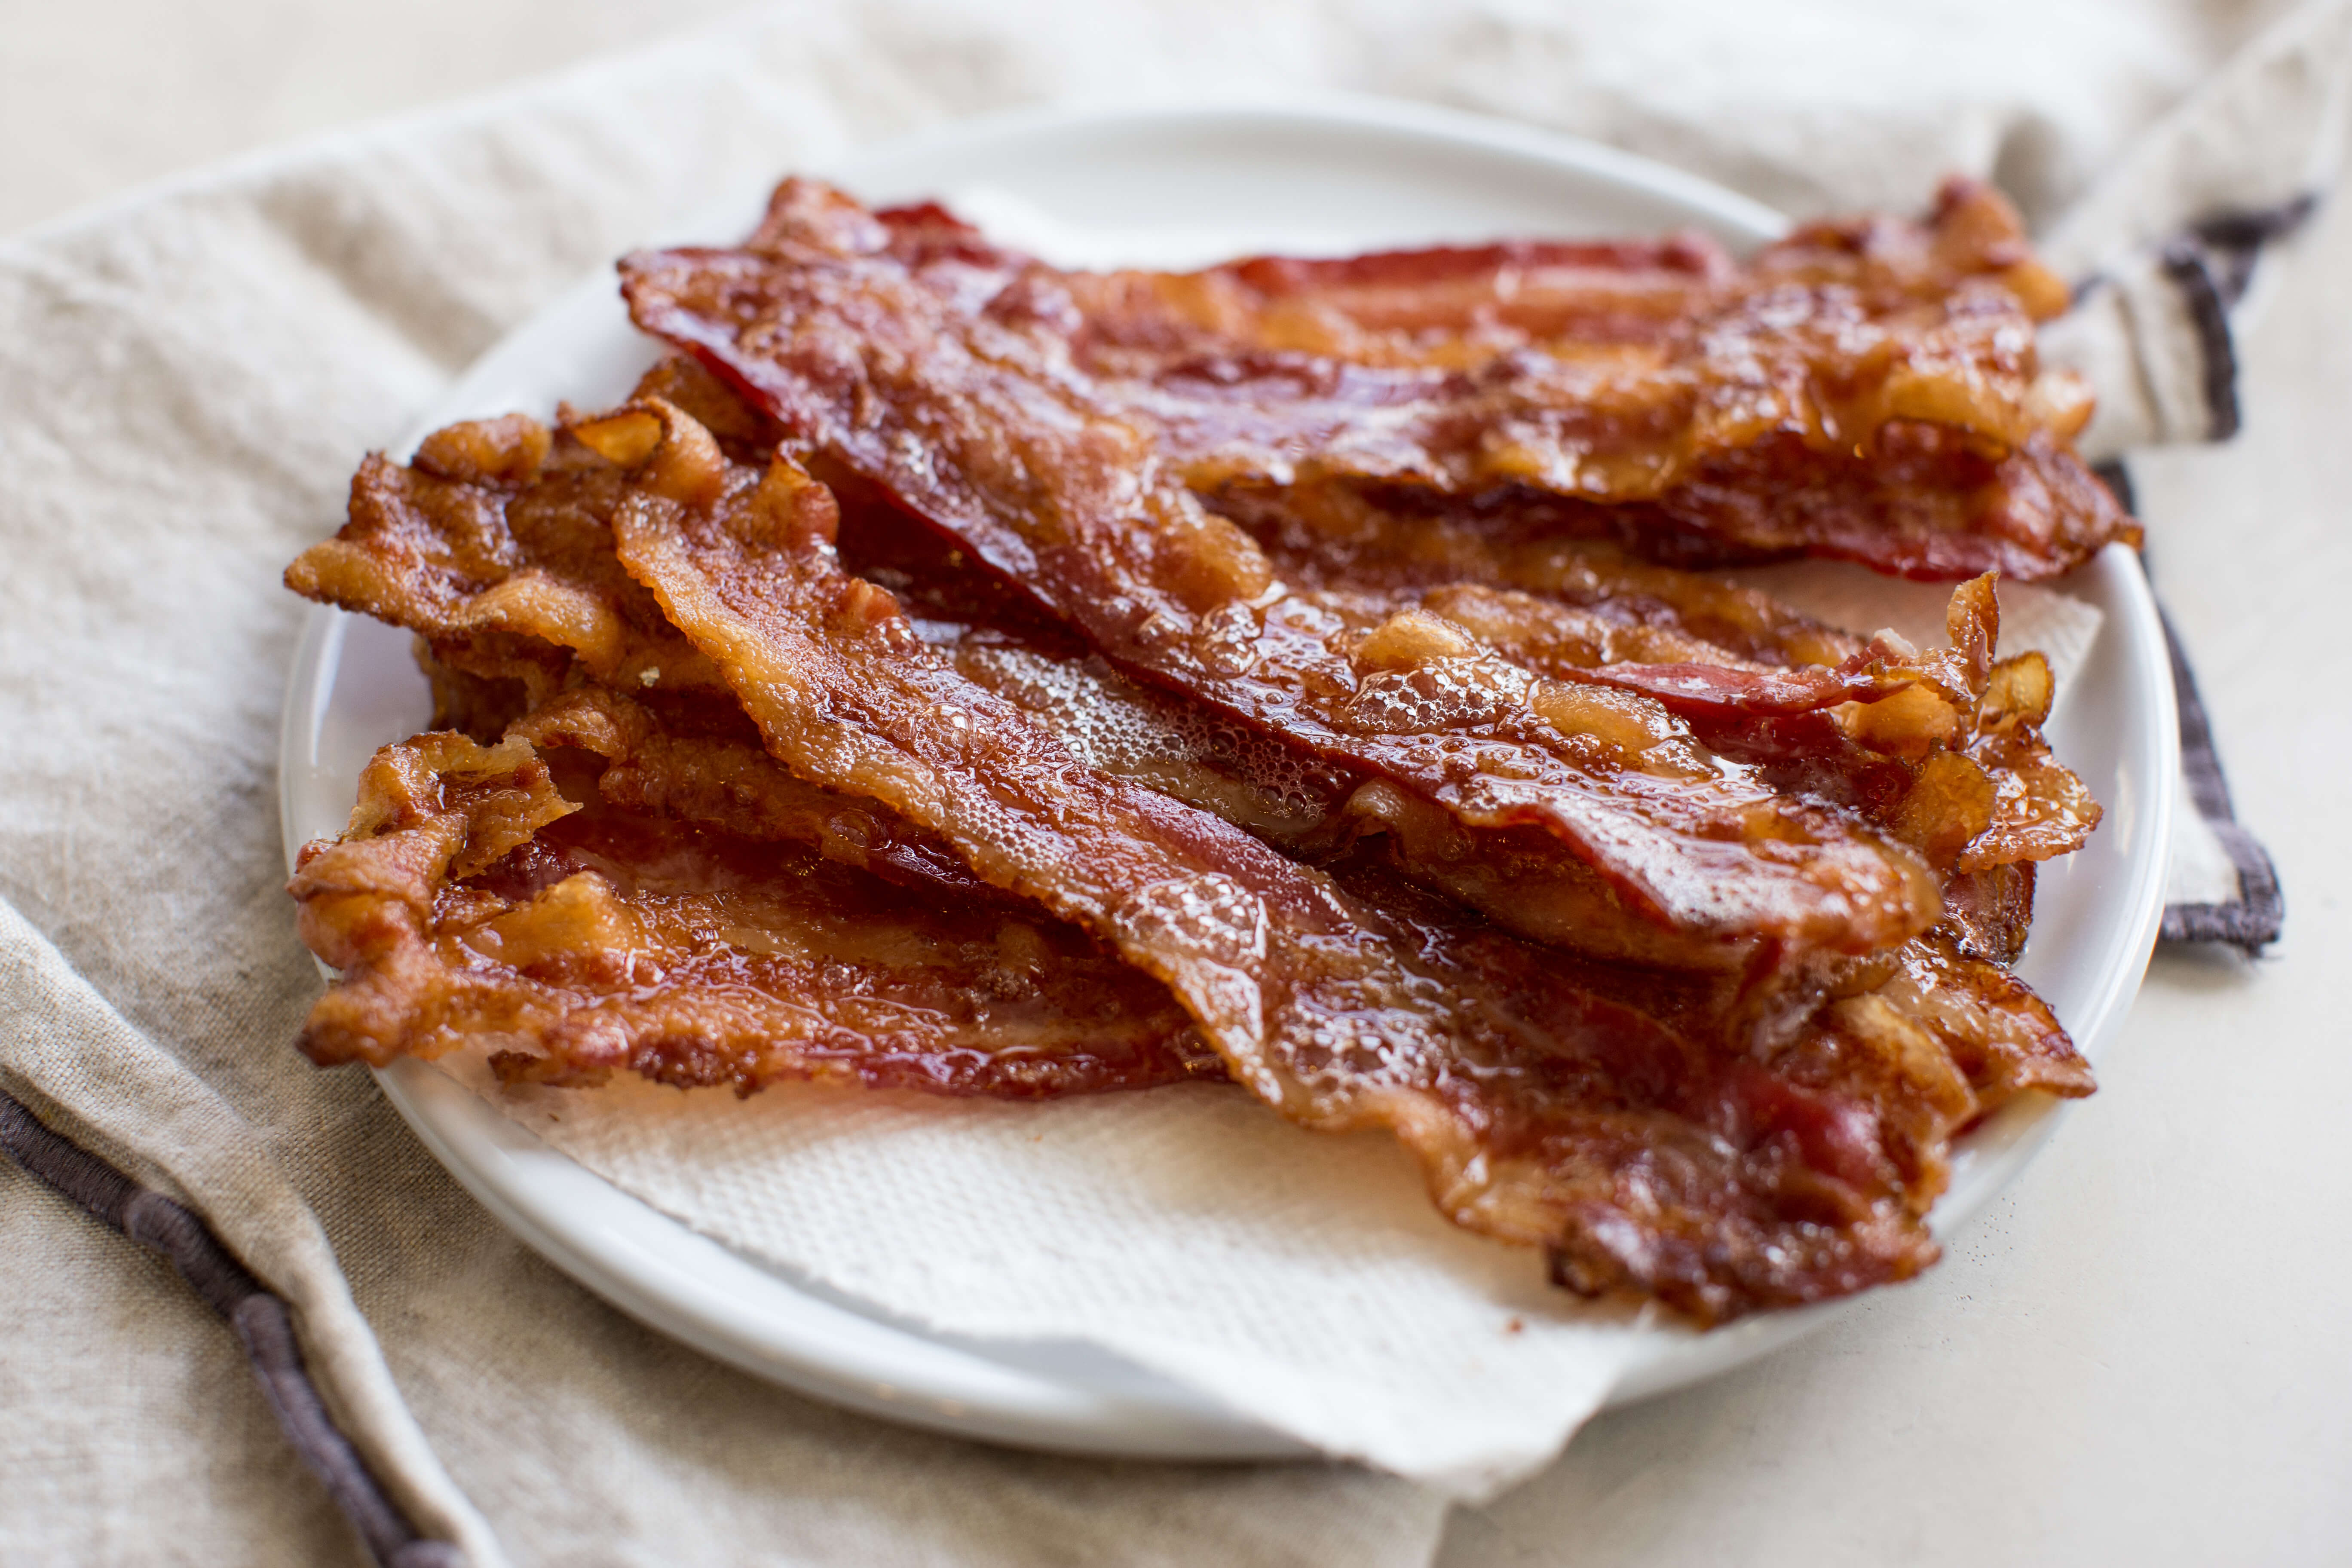 https://www.loveandzest.com/wp-content/uploads/2019/02/How-to-Cook-Bacon-in-the-Oven-Hi-Res-4.jpg